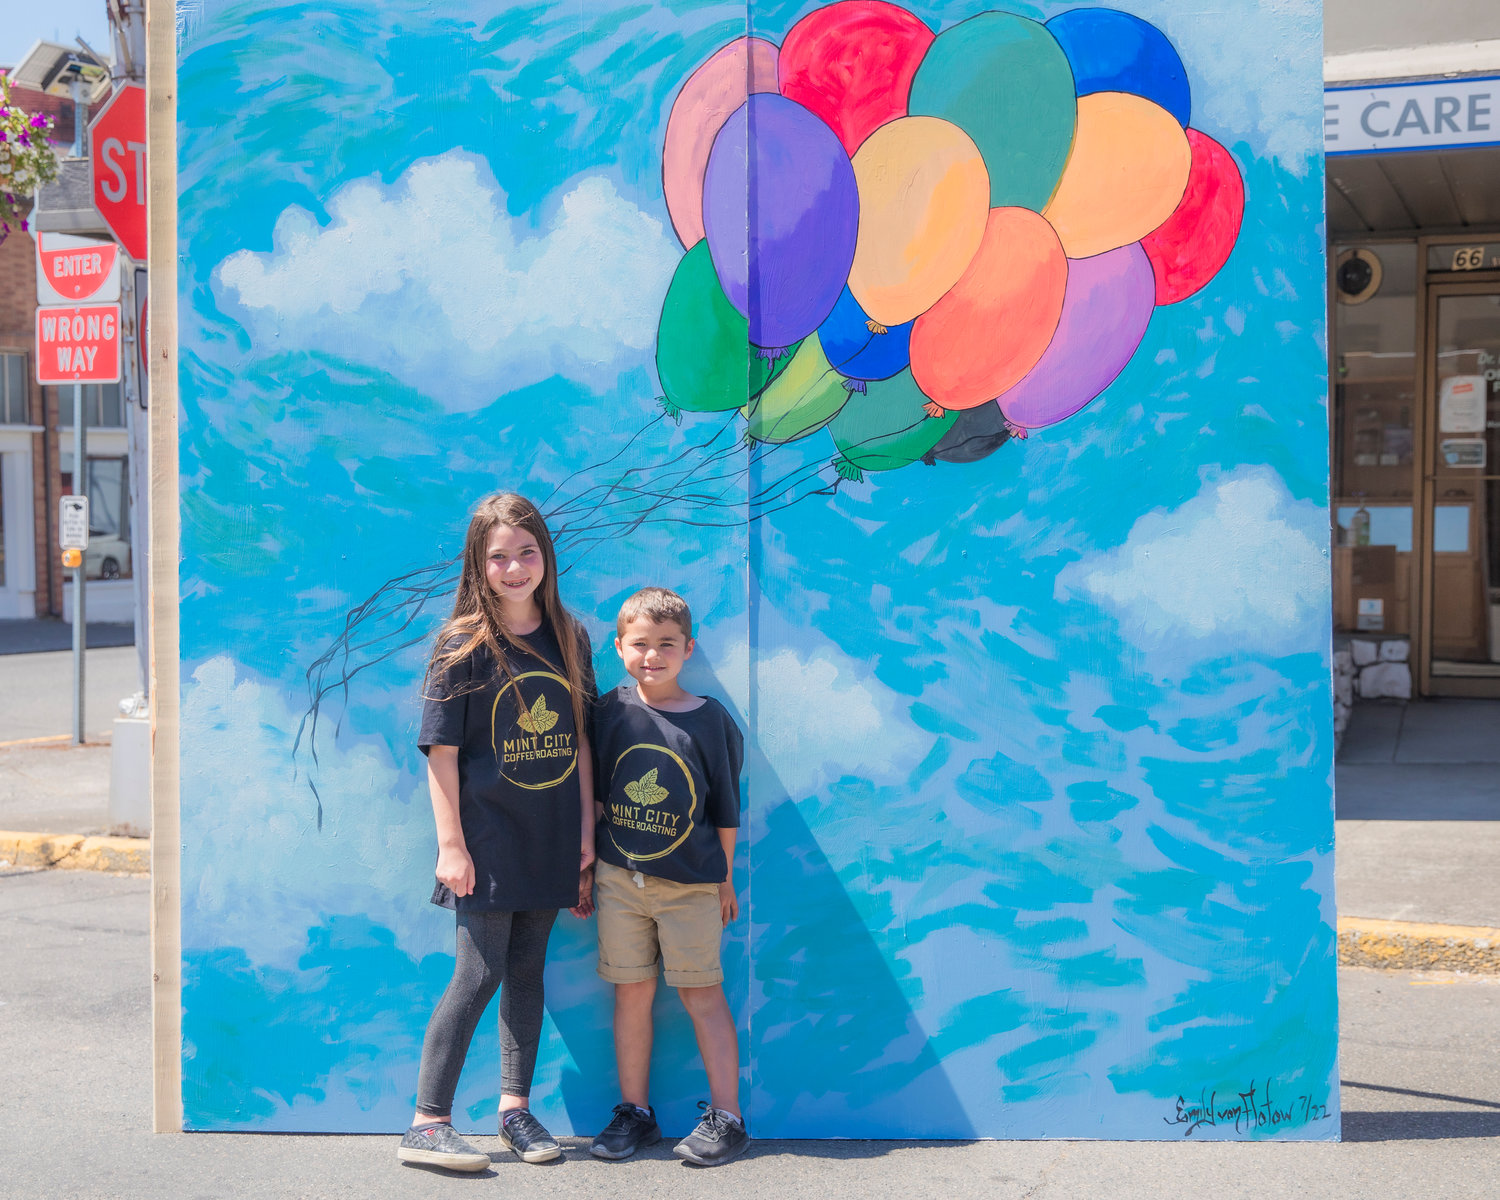 Kora, 10, and Landon Askin, 5, smile for a photo near artwork on display during Chehalis Fest Saturday afternoon.